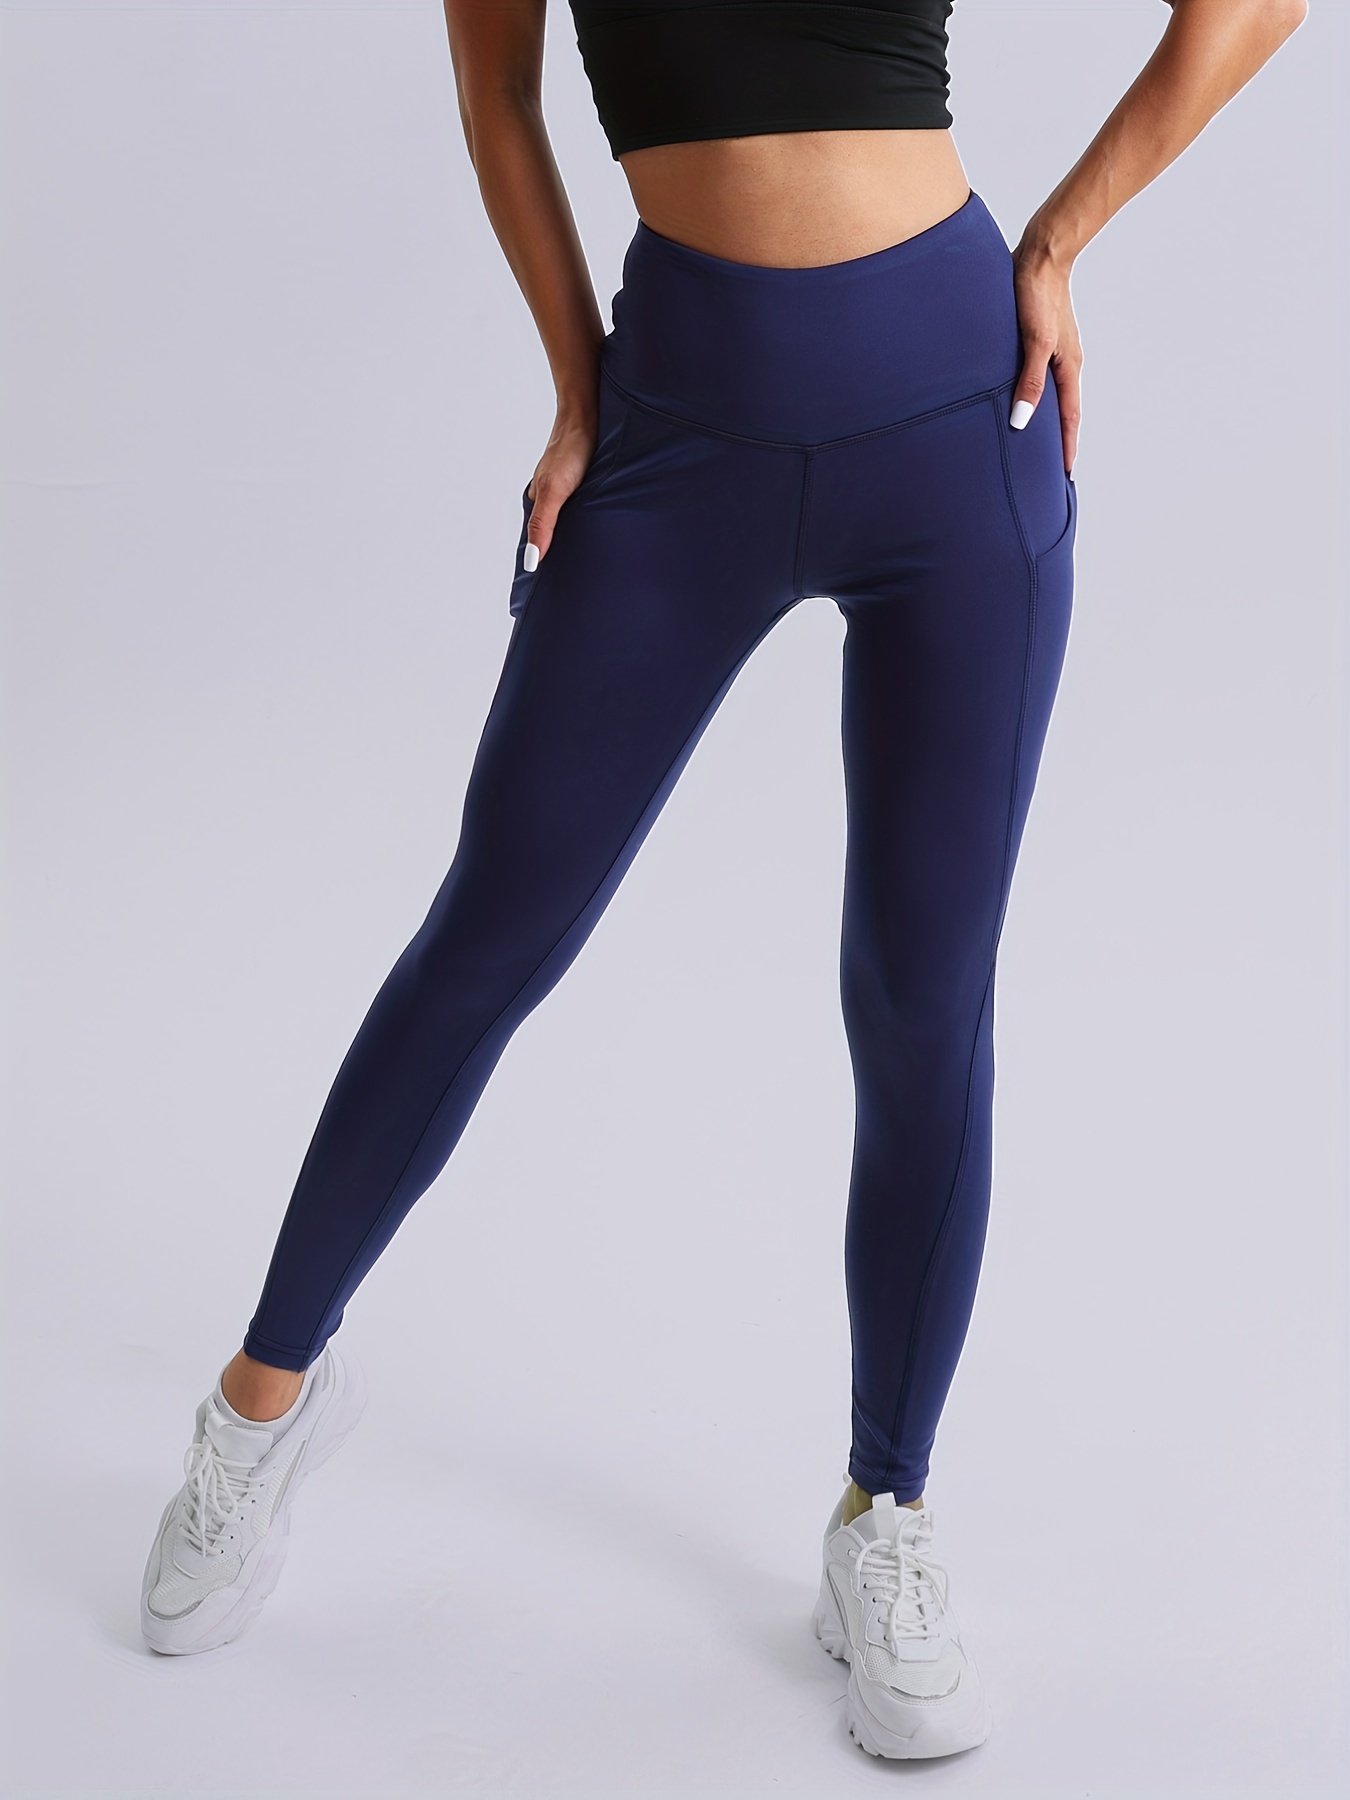  Women's Yoga Pants Leggings with Pockets High Waisted